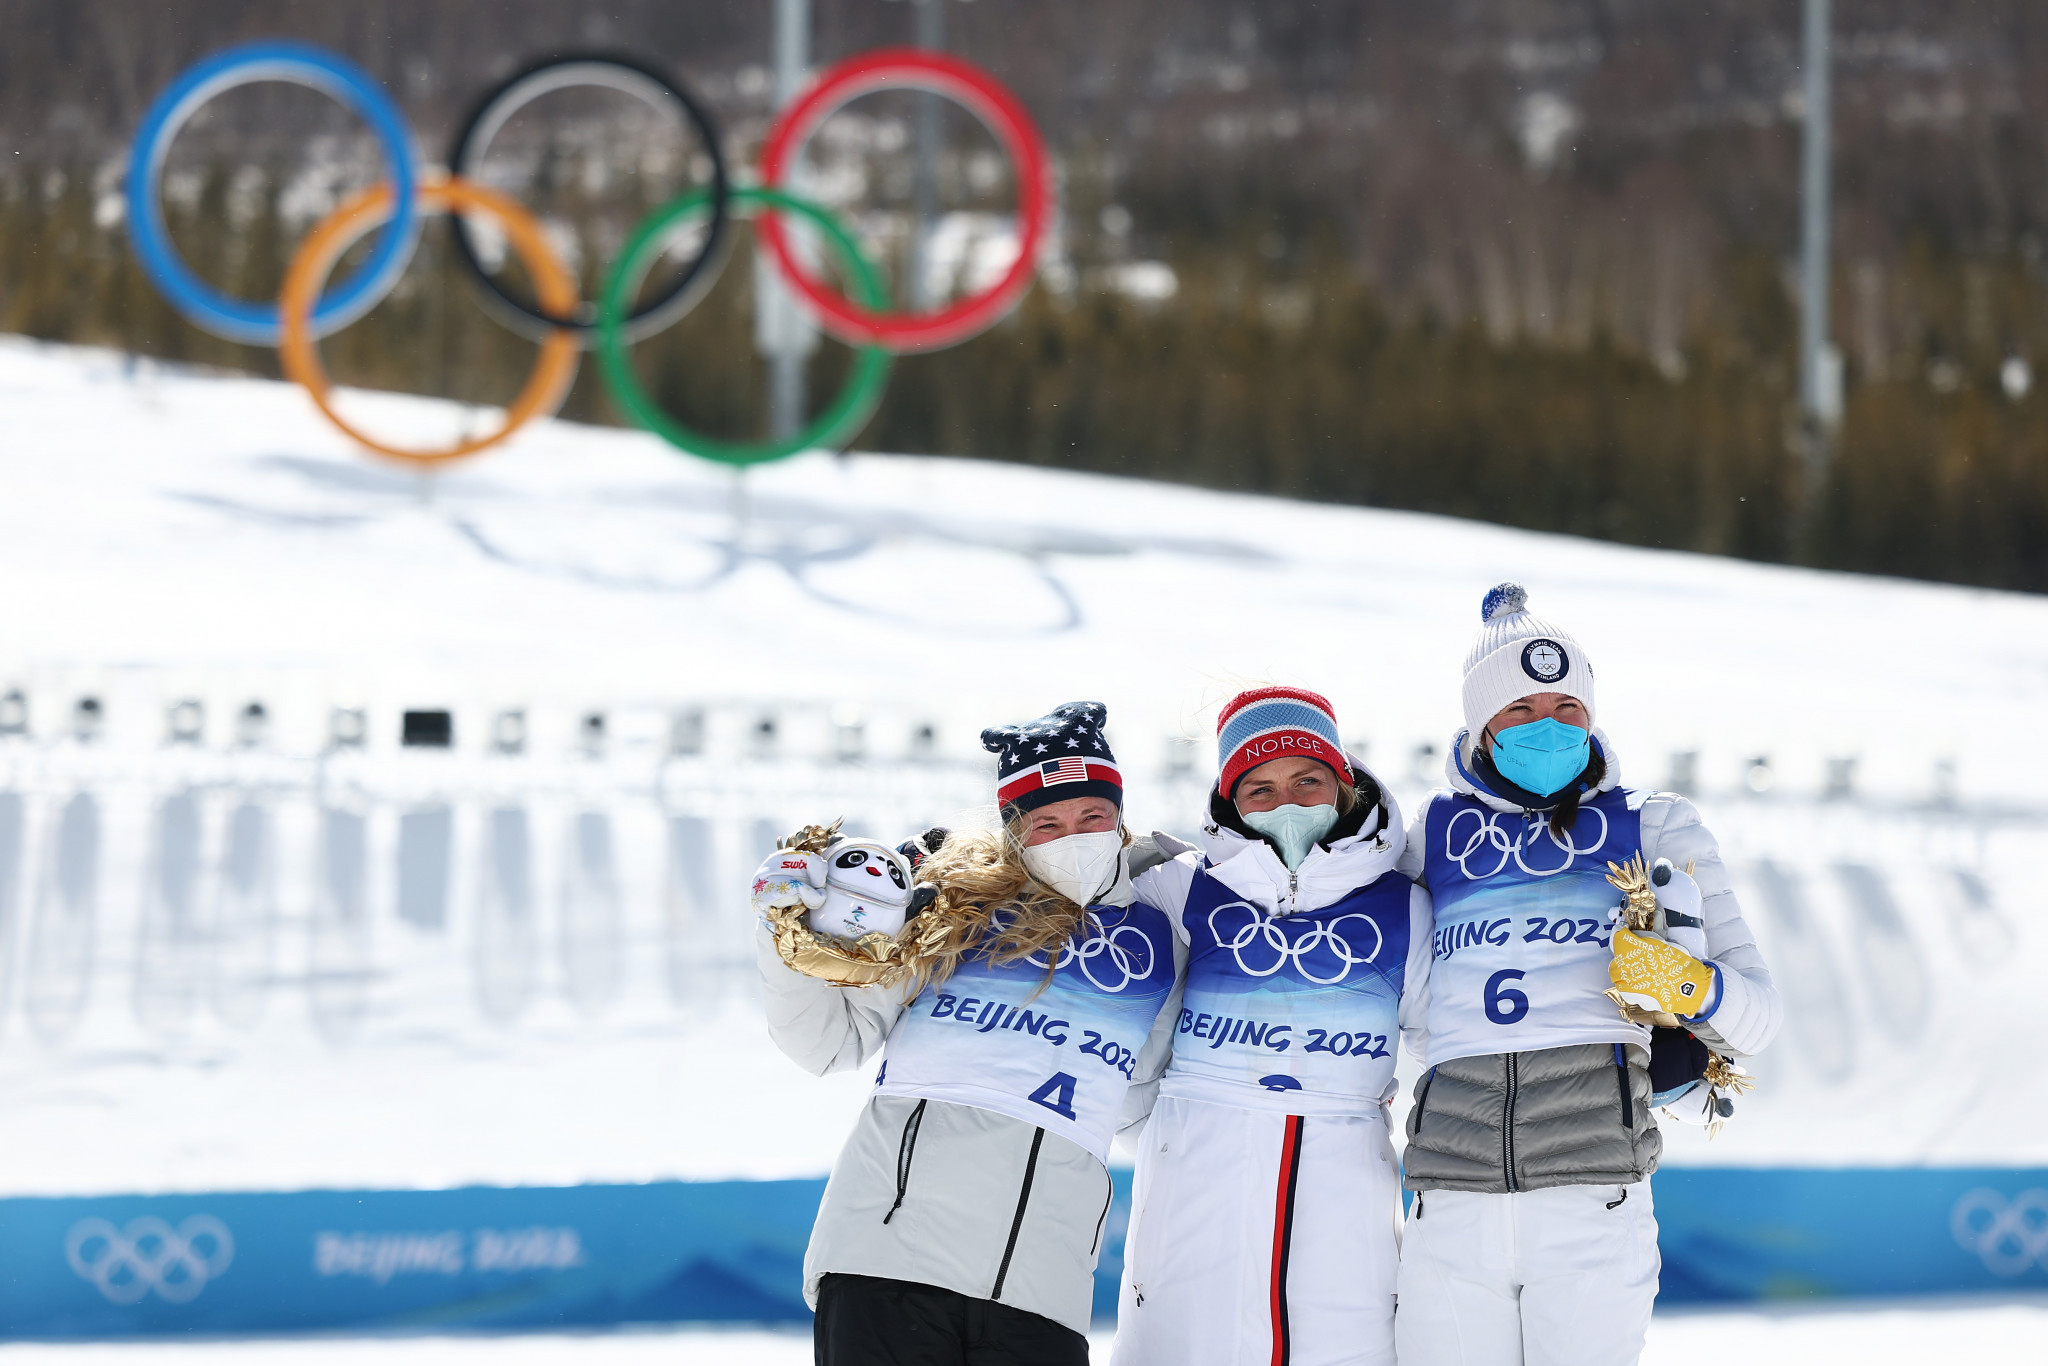 Jessie Diggins, Therese Johaug and Kerttu Niskanen sealed podium places in the final event of the 2022 Winter Olympics ©Getty Images